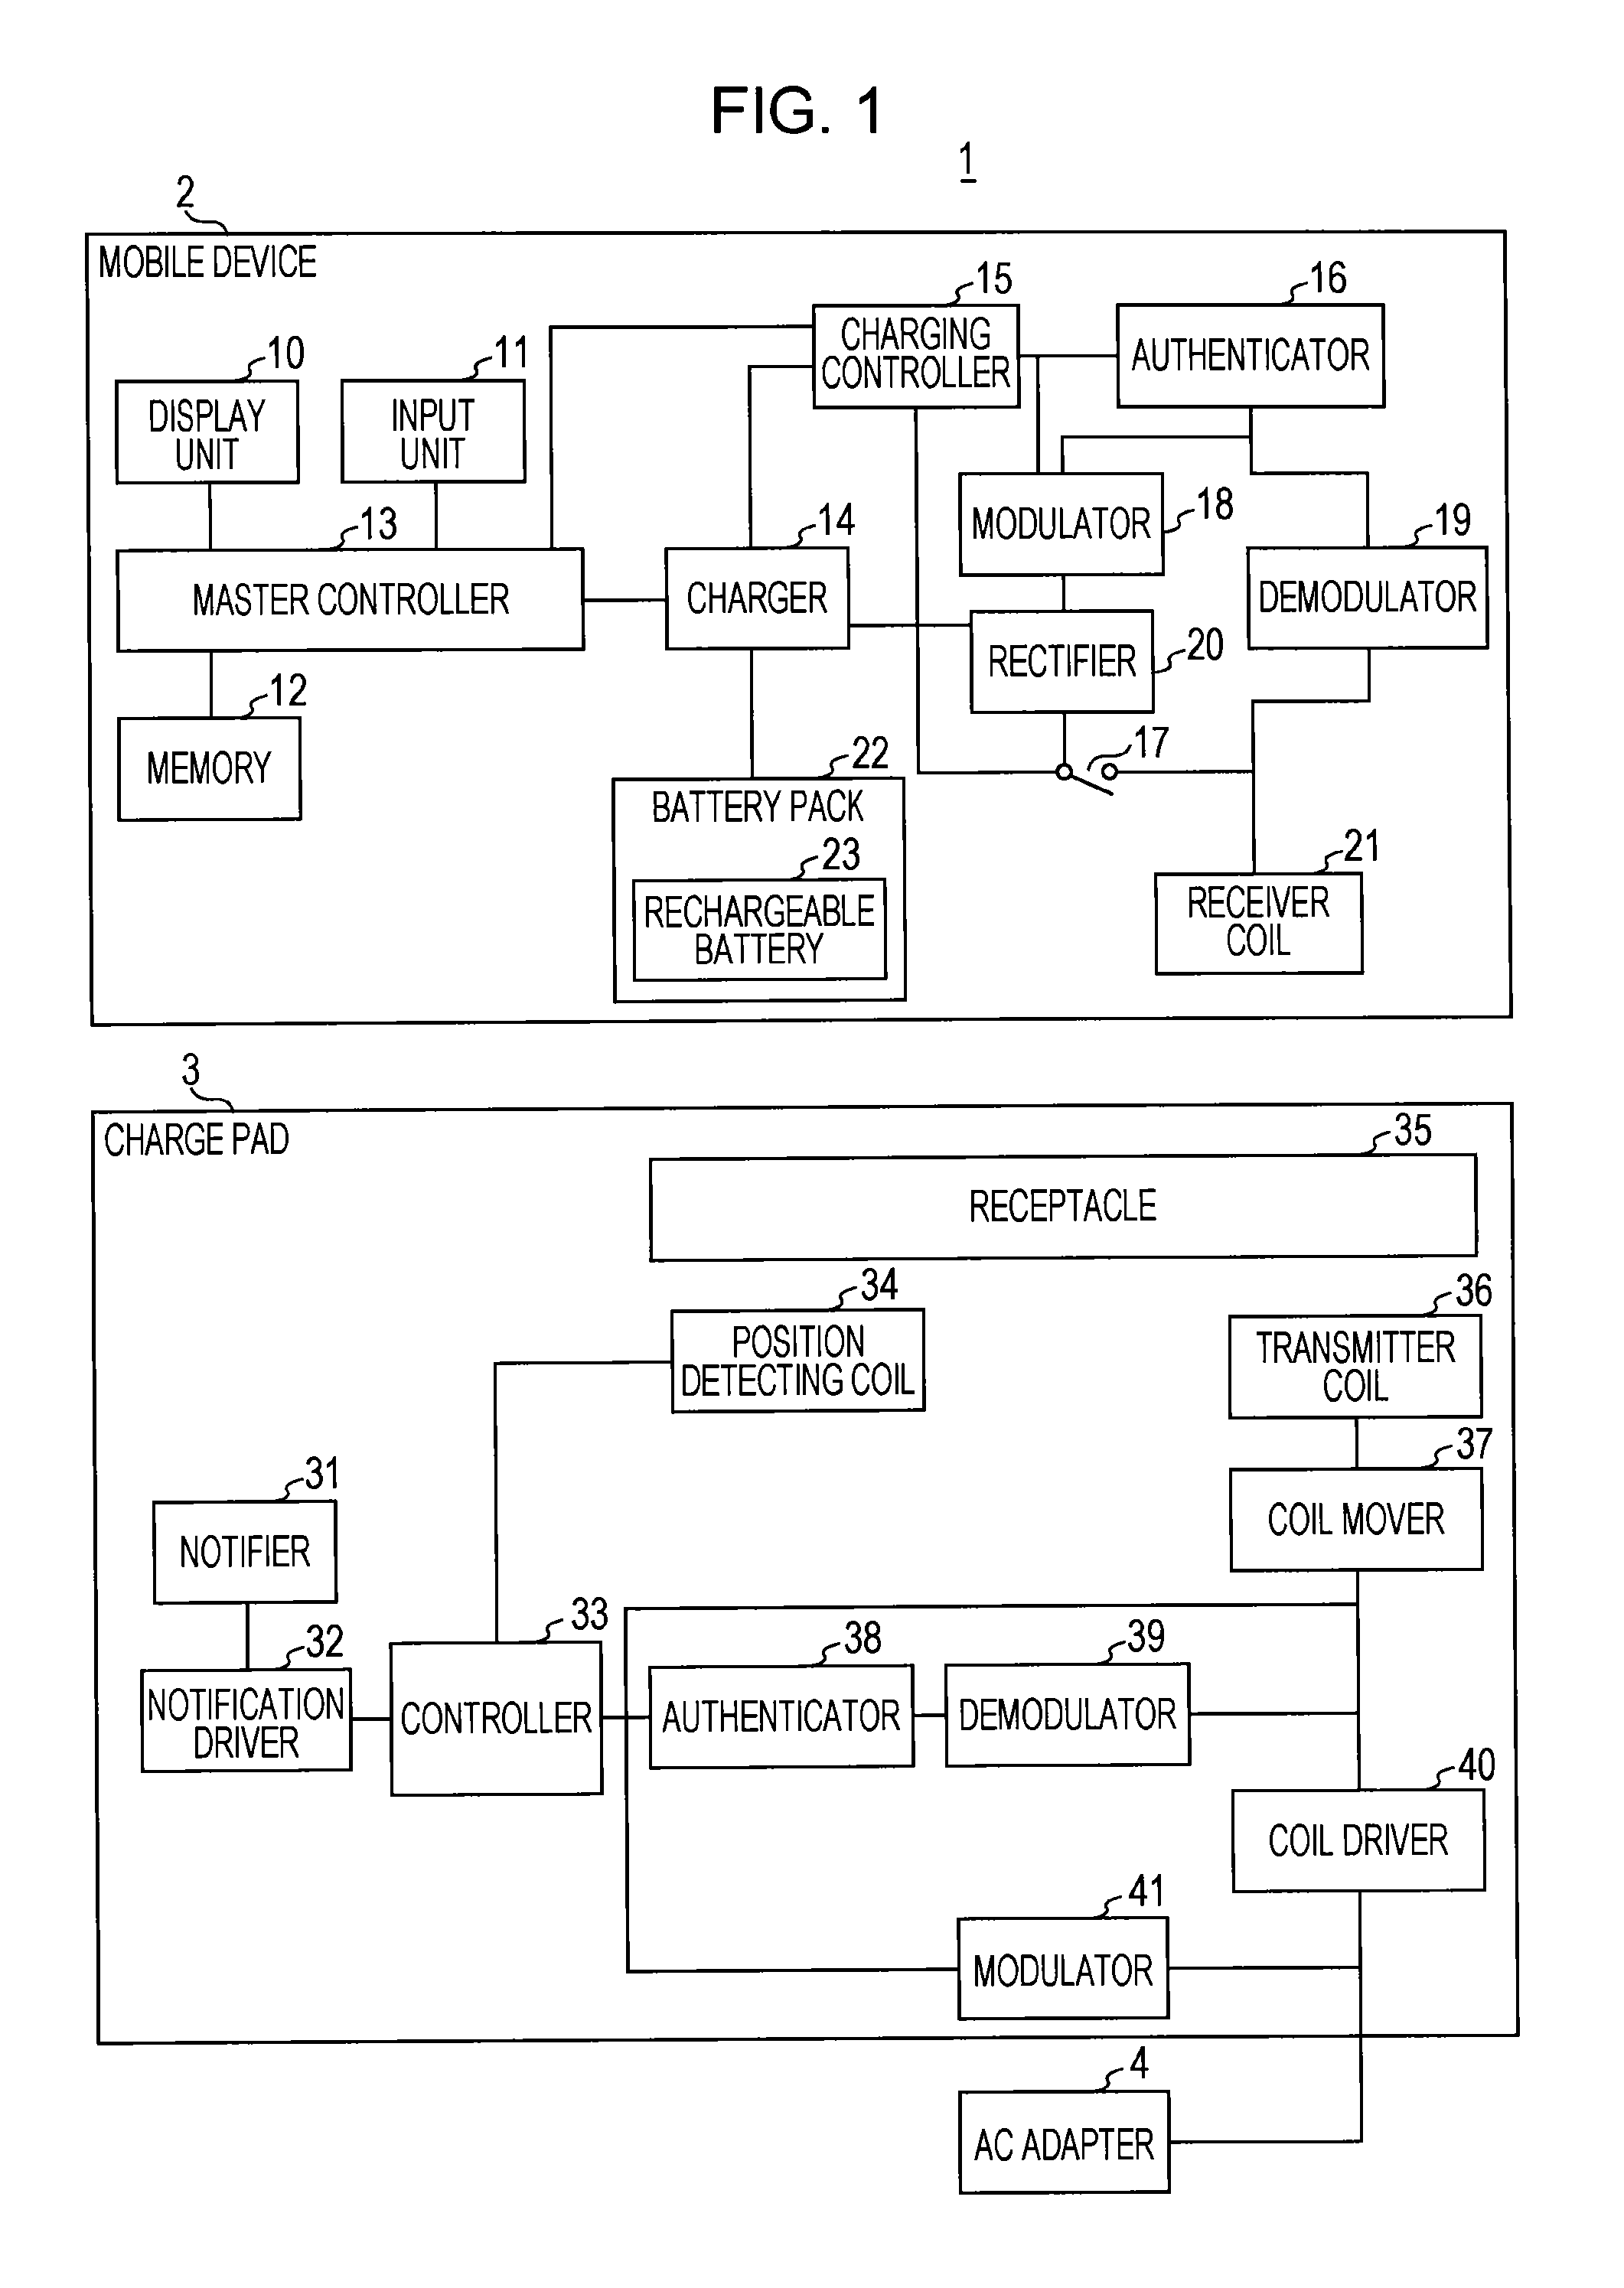 Mobile device and charging apparatus